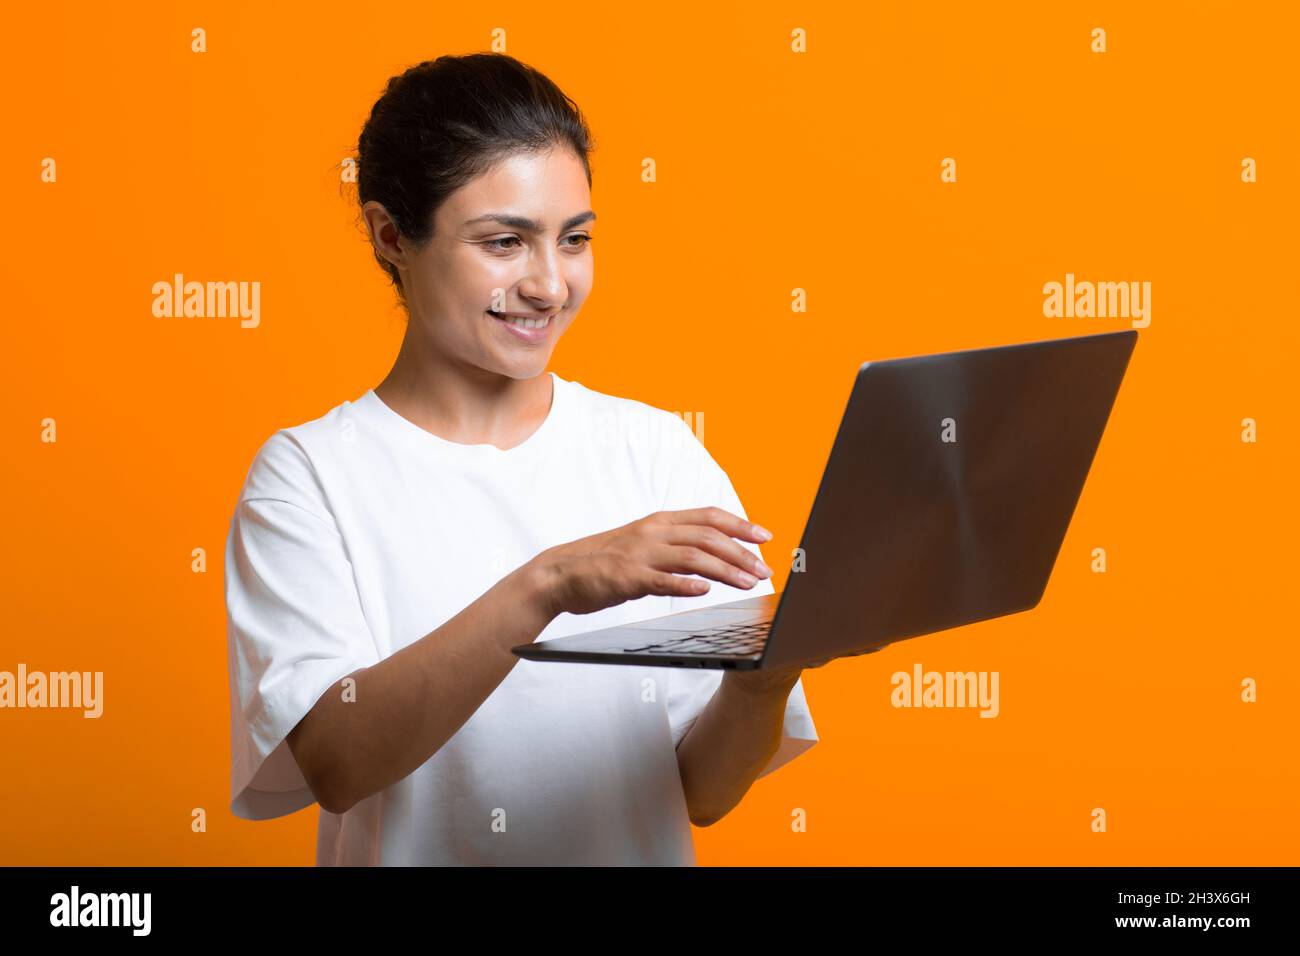 Portrait of young smiling adult indian woman working with laptop computer. Stock Photo